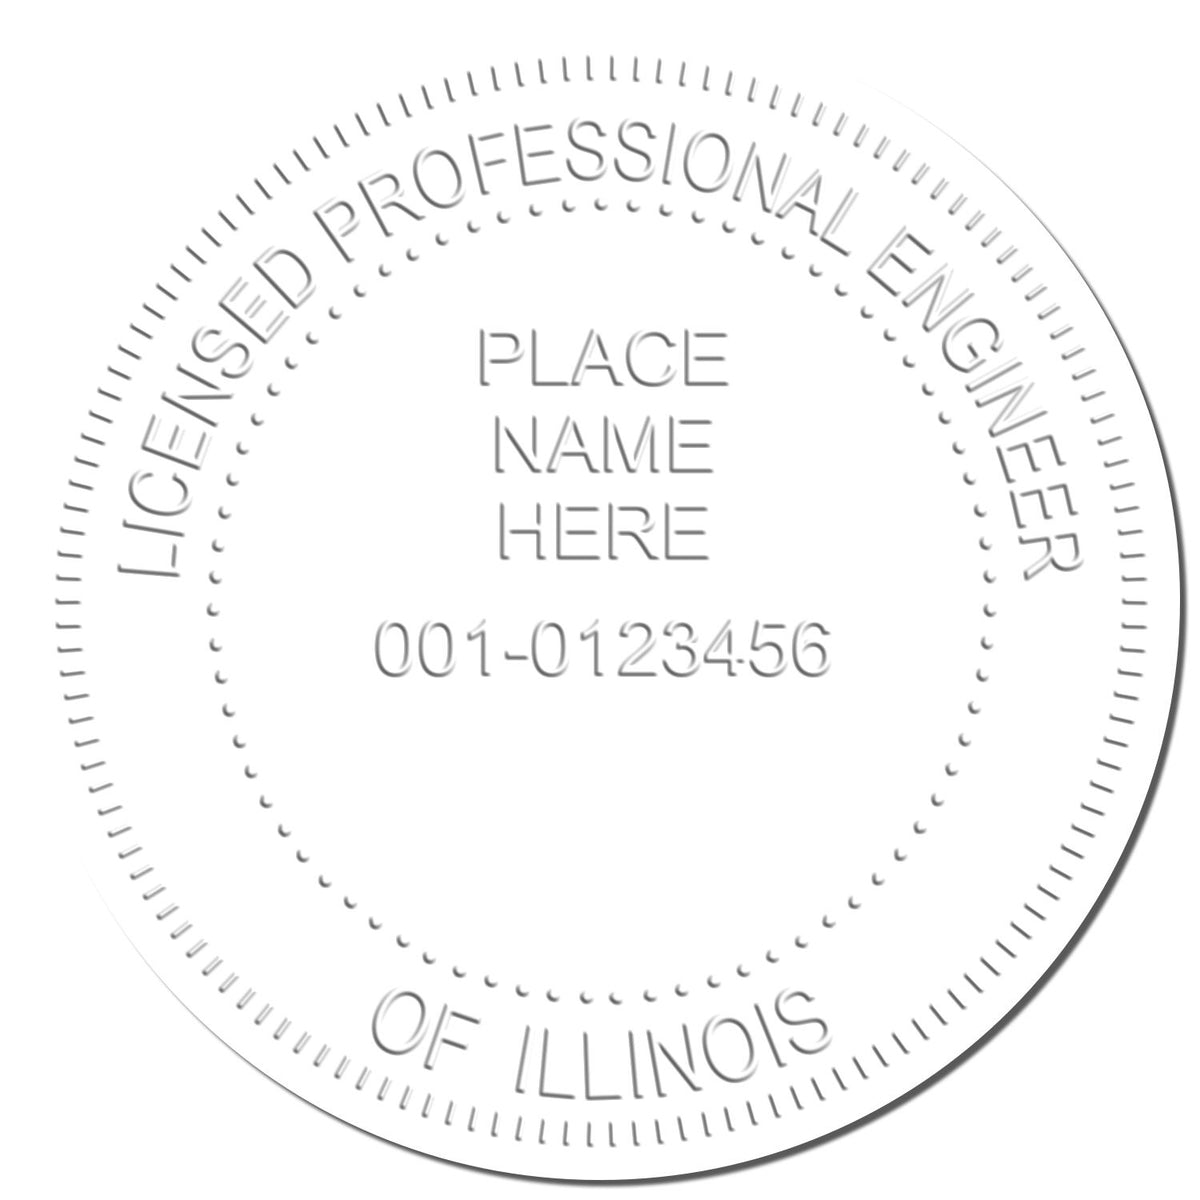 A photograph of the Handheld Illinois Professional Engineer Embosser stamp impression reveals a vivid, professional image of the on paper.